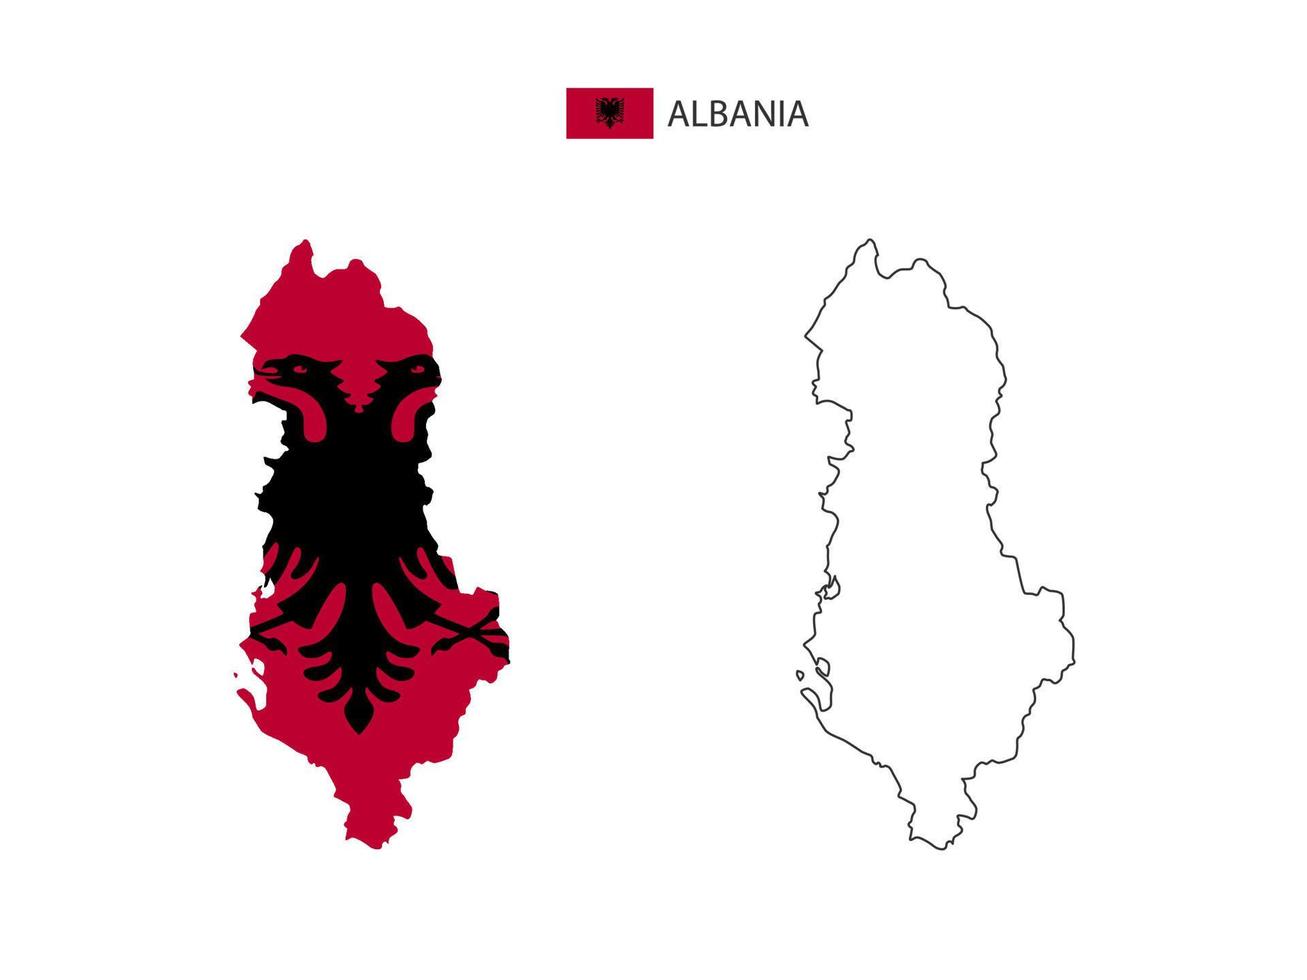 Albania map city vector divided by outline simplicity style. Have 2 versions, black thin line version and color of country flag version. Both map were on the white background.